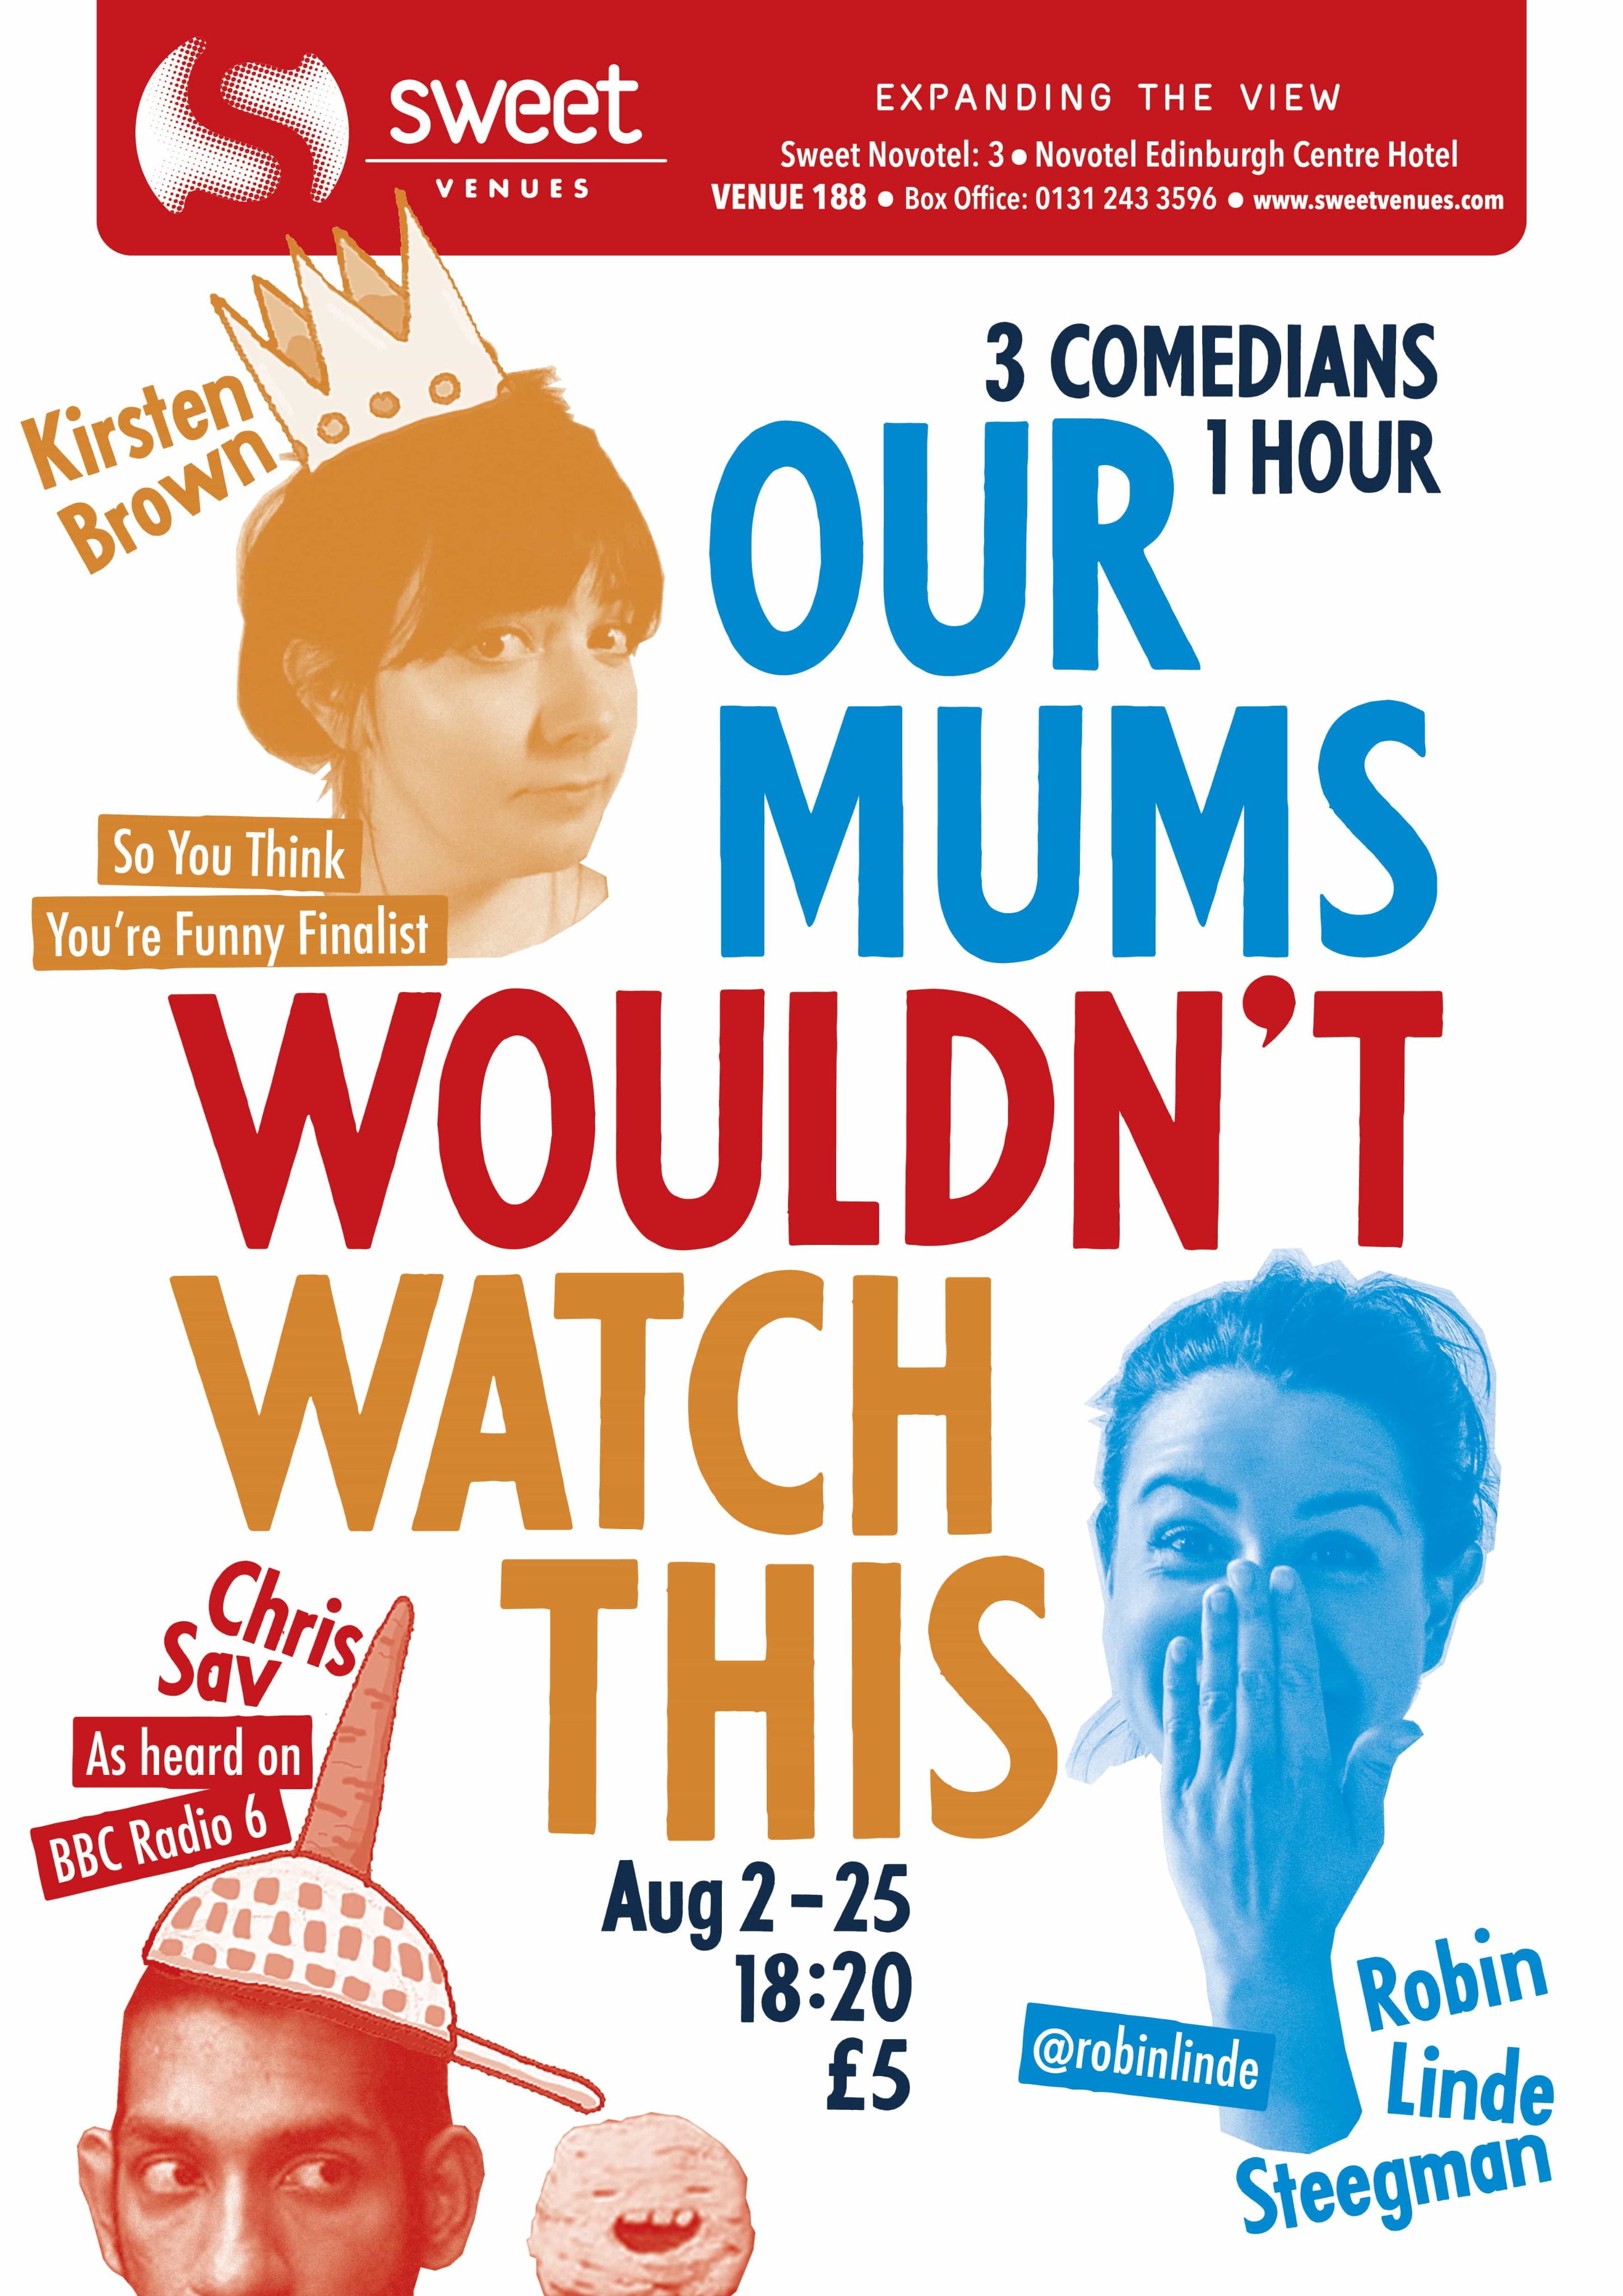 The poster for Our Mums Wouldn't Watch This